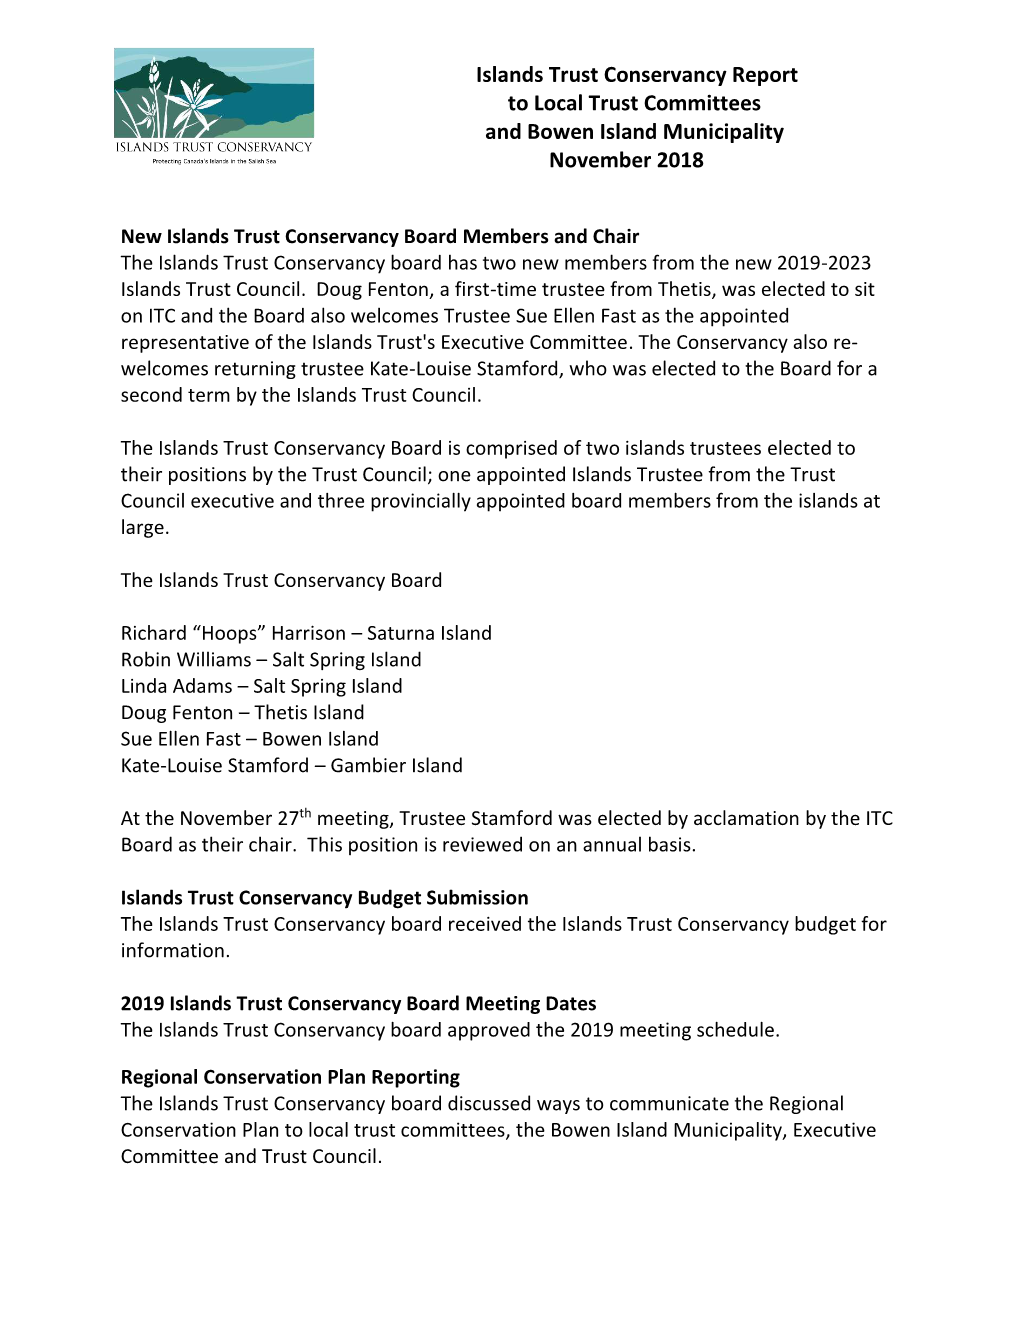 Islands Trust Conservancy Report to Local Trust Committees and Bowen Island Municipality November 2018